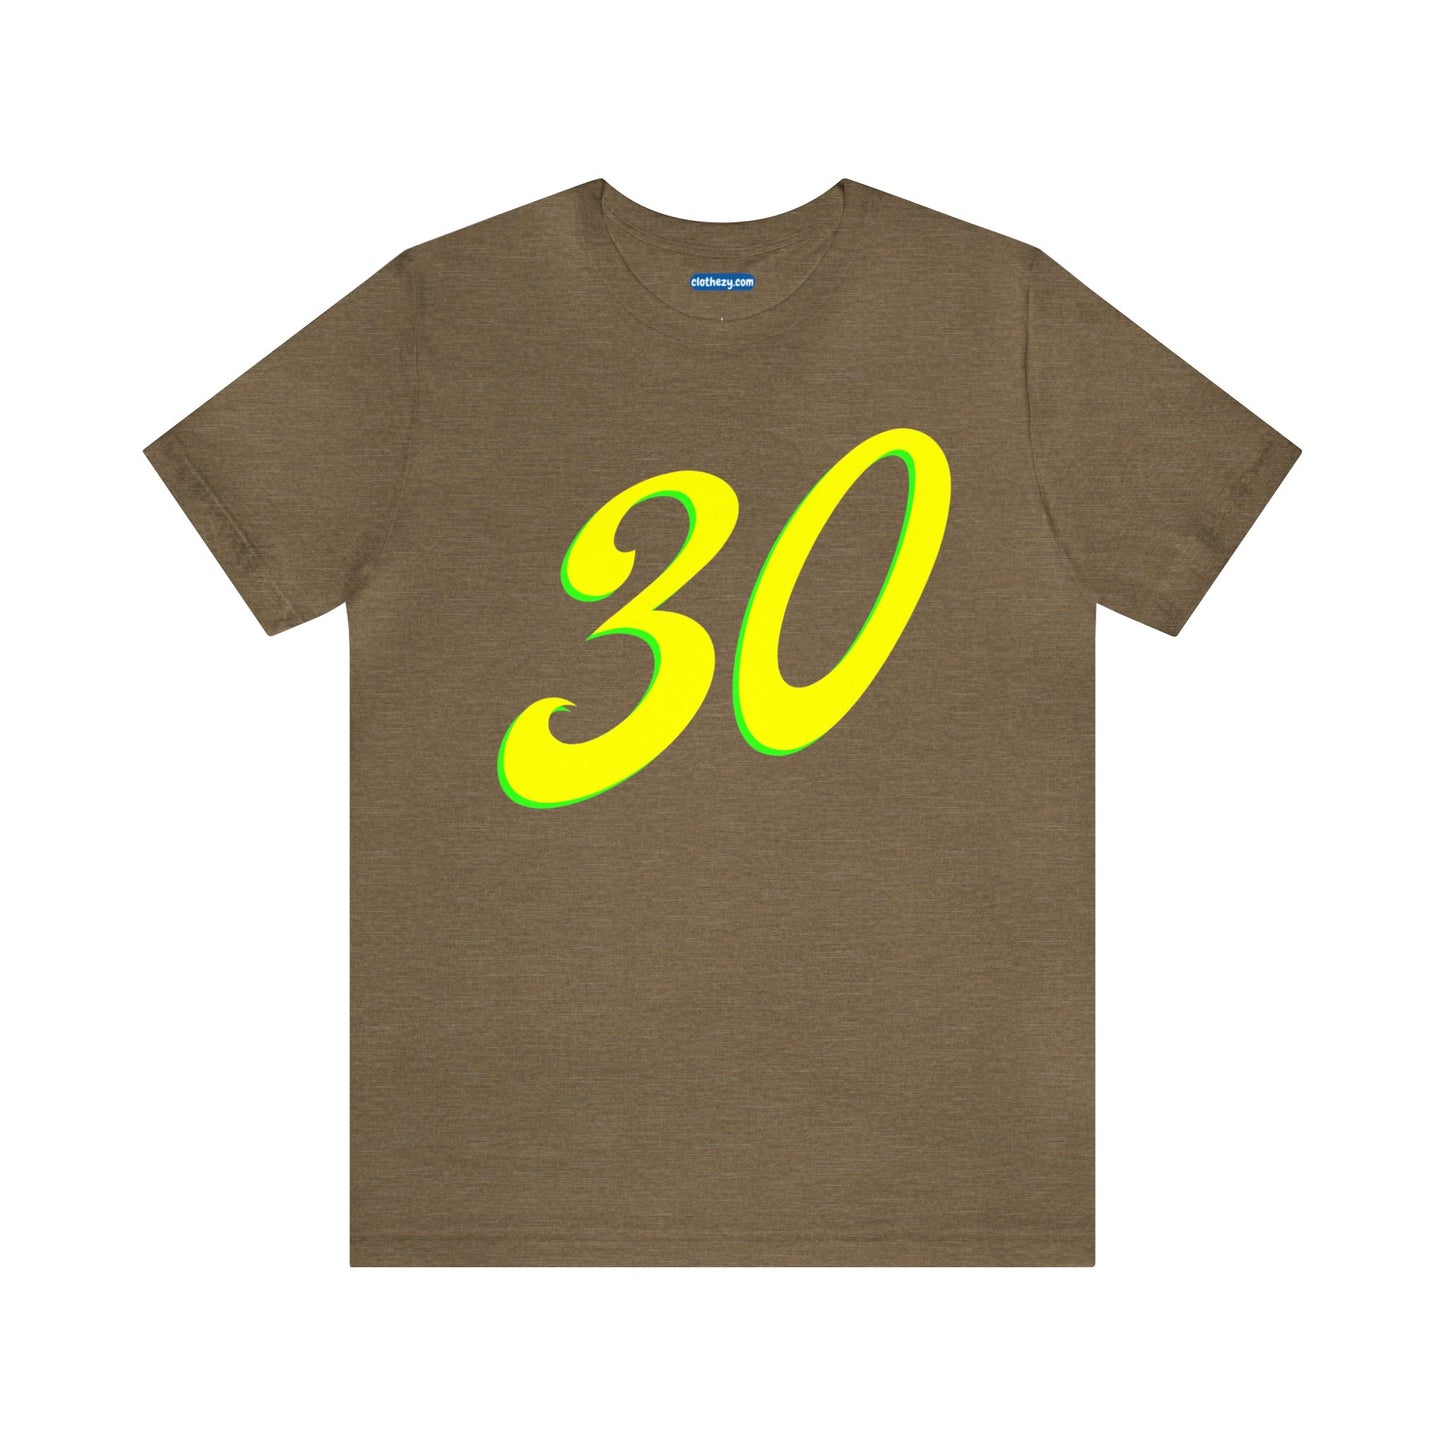 Number 30 Design - Soft Cotton Tee for birthdays and celebrations, Gift for friends and family, Multiple Options by clothezy.com in Olive Heather Size Small - Buy Now